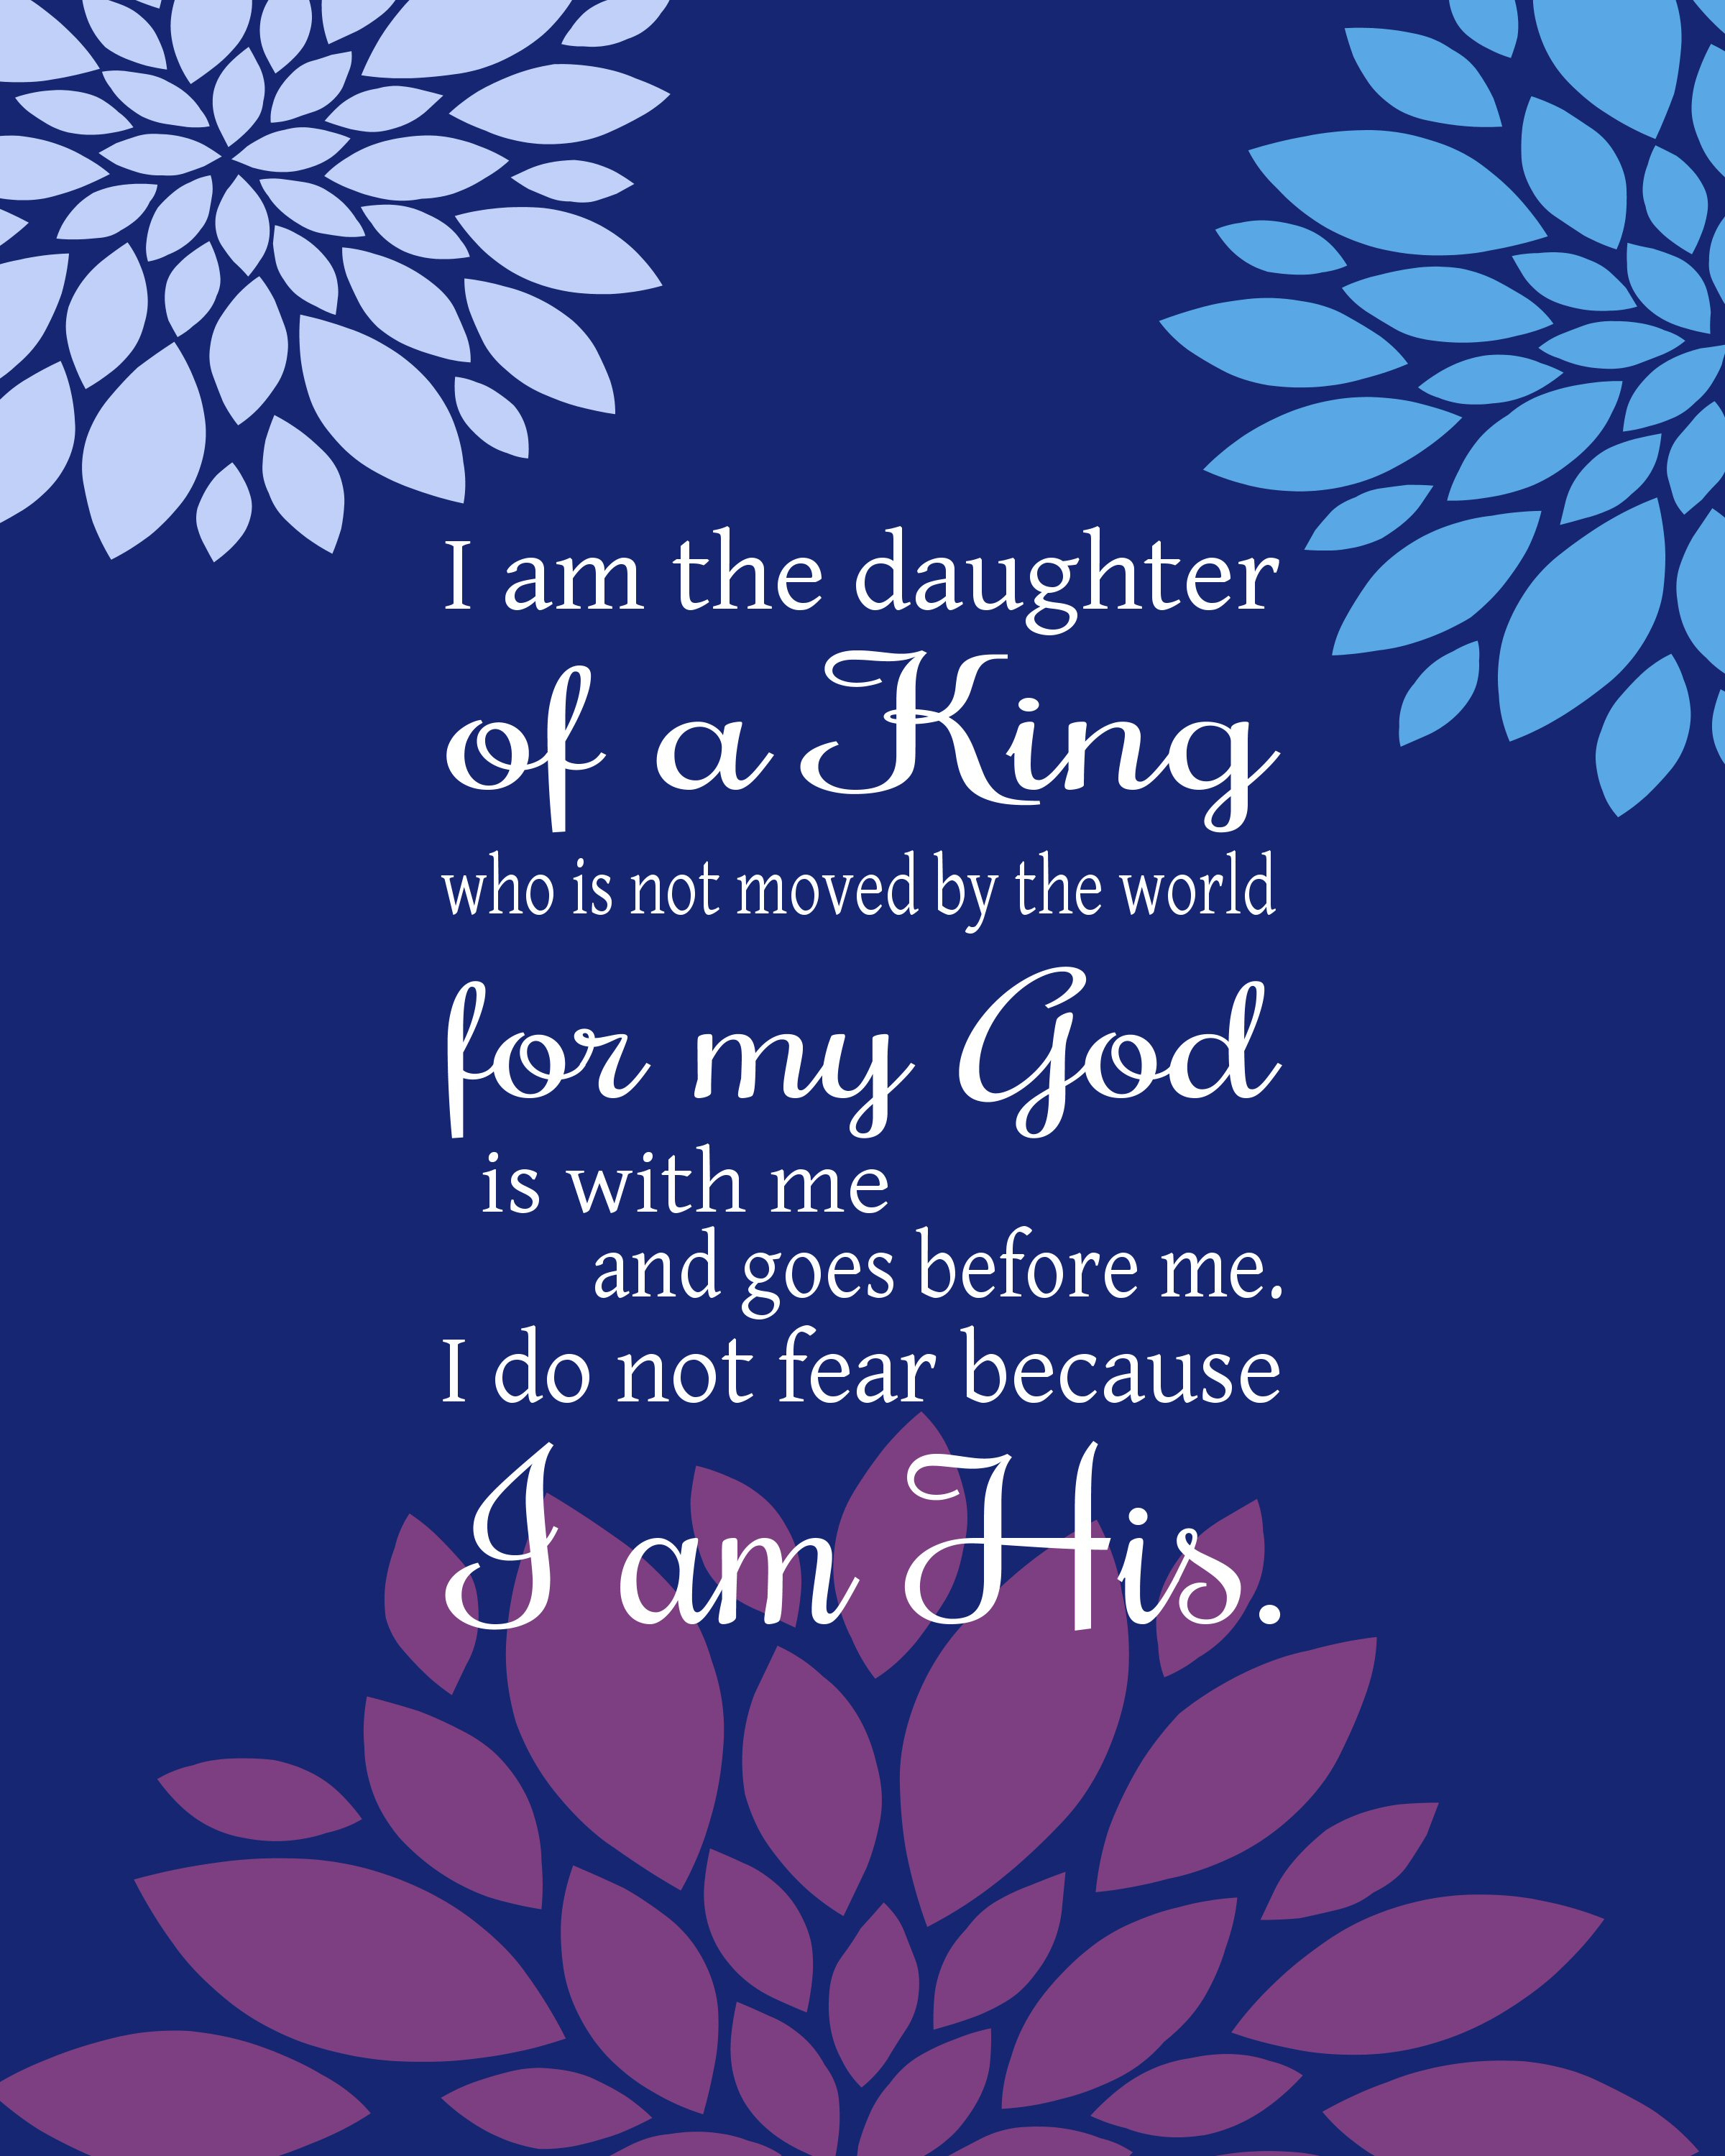 Printschristine, Inc. Personalized Gifts - Free Printable Girls - Free Printable Christian Art